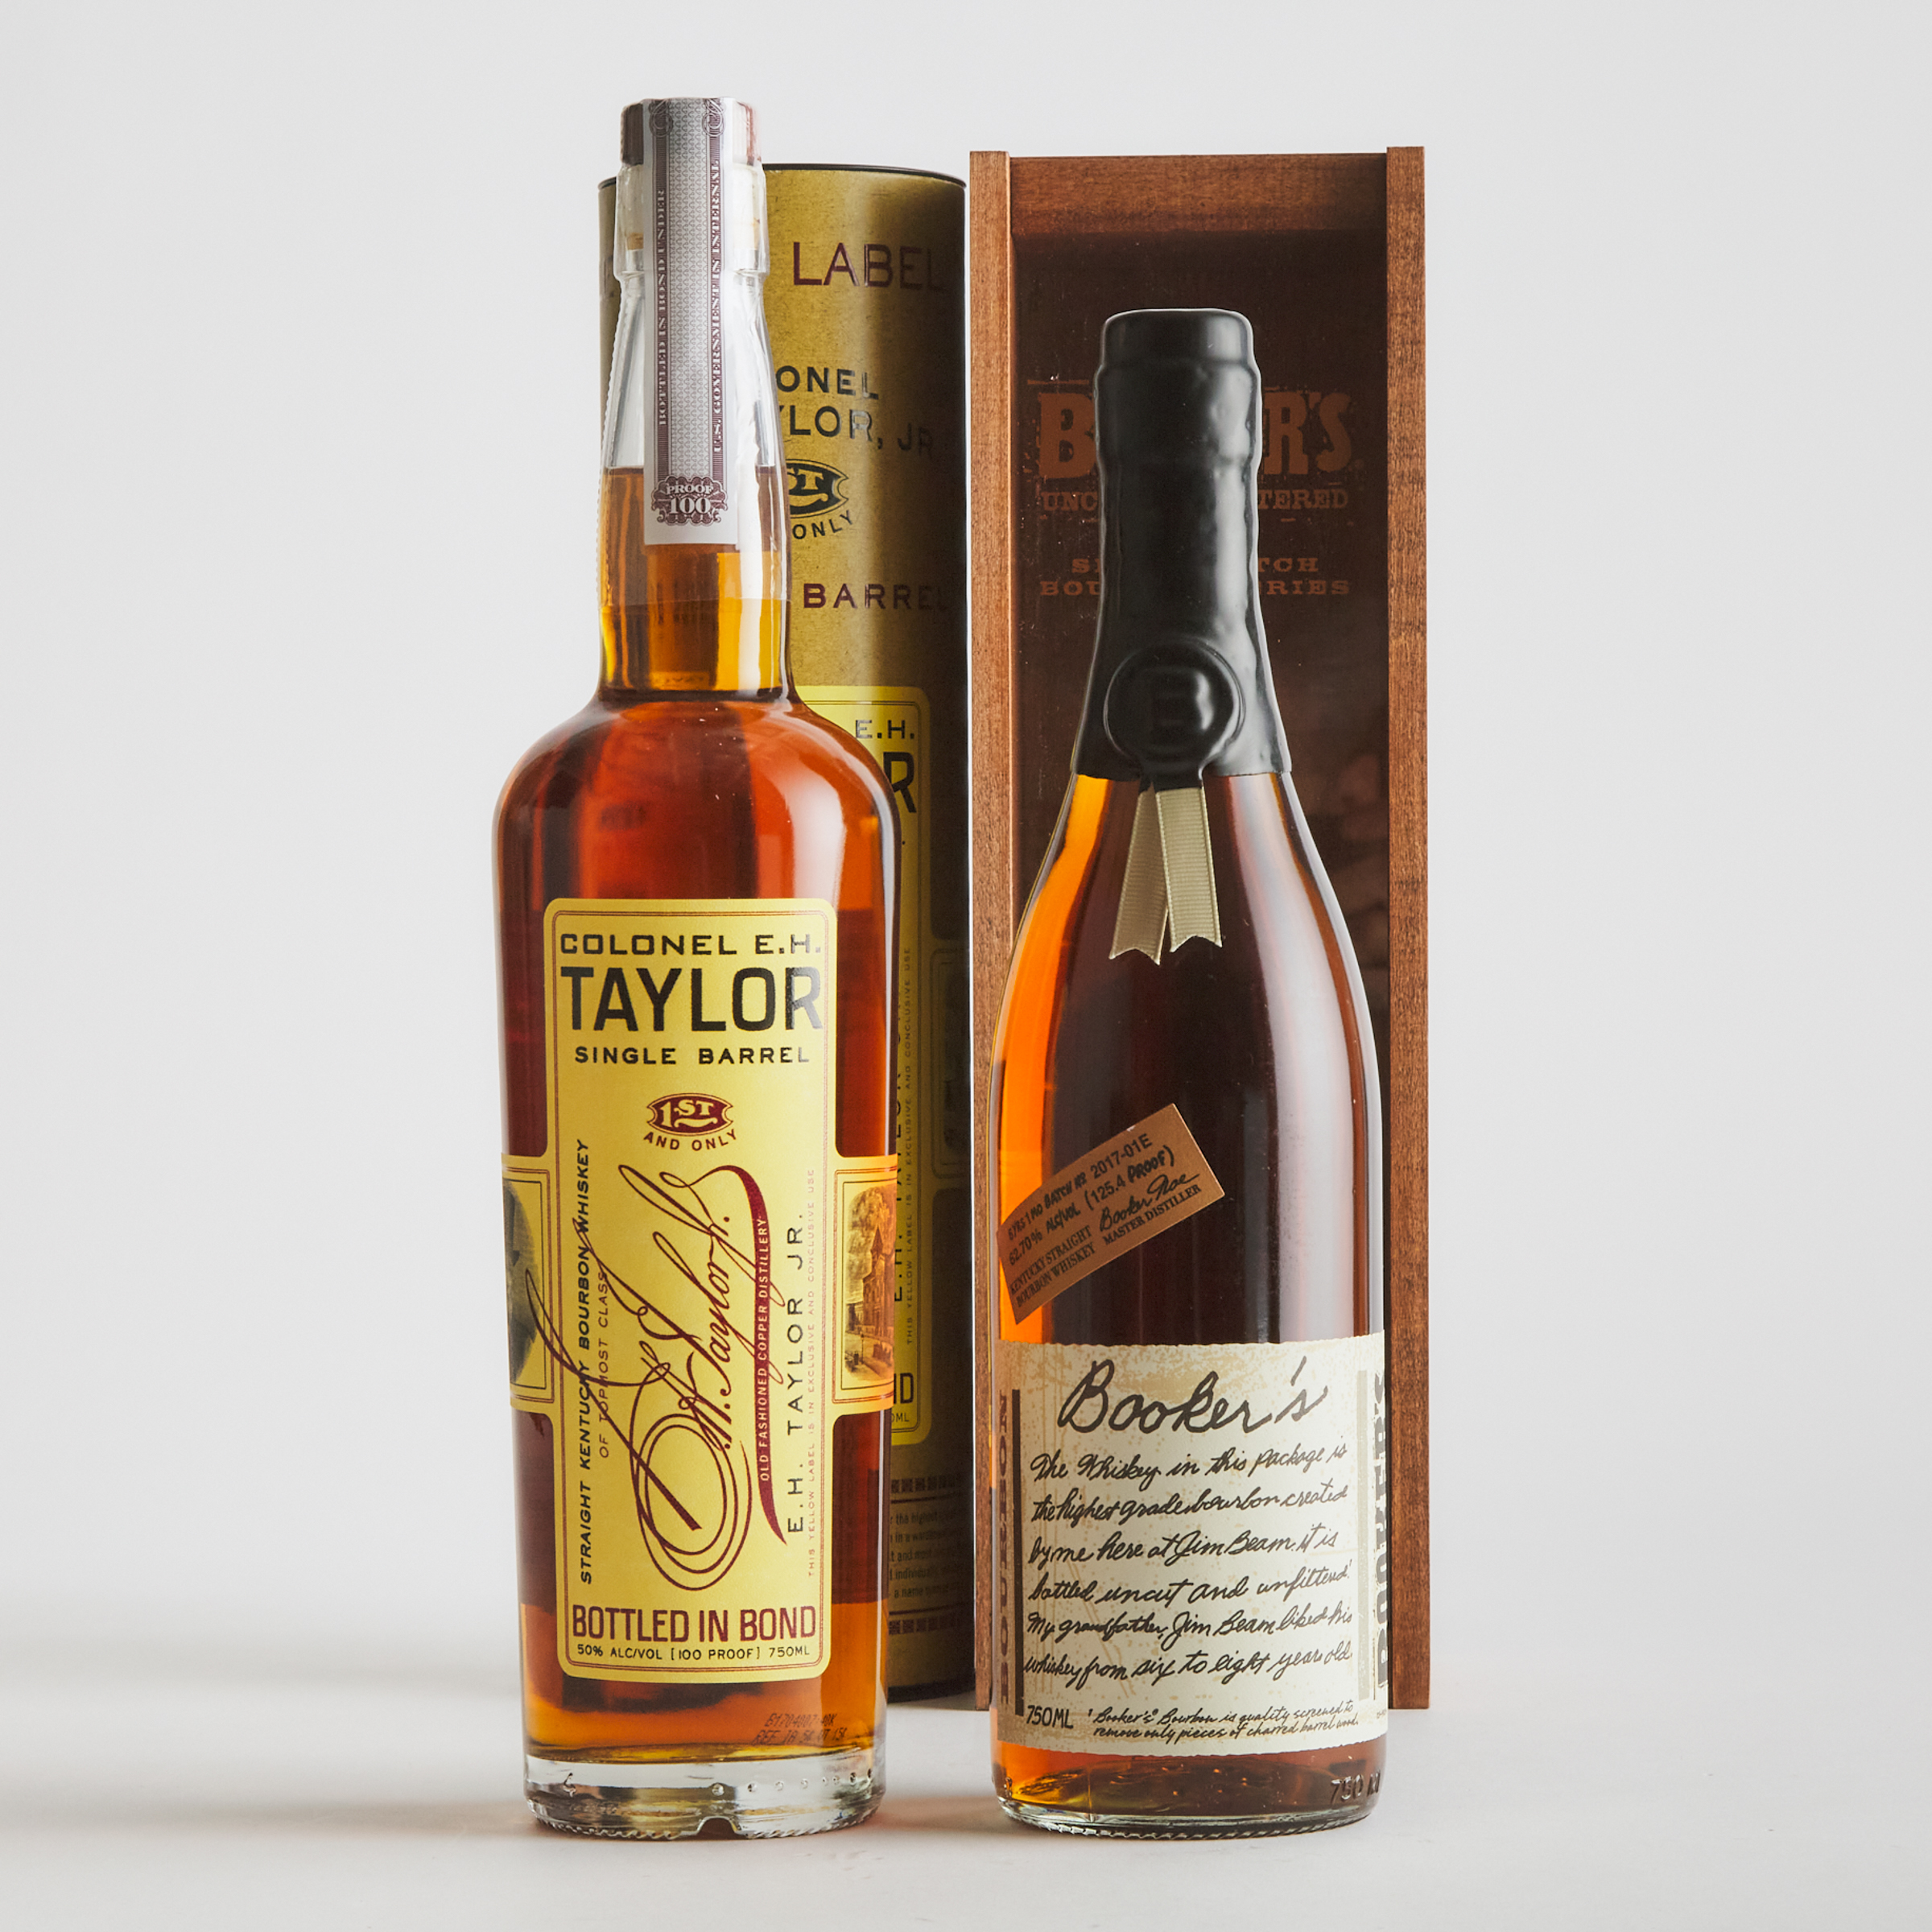 BOOKER’S KENTUCKY STRAIGHT BOURBON WHISKEY 6 YEARS 1 MONTH (ONE 750 ML)
COLONEL E.H.TAYLOR JR. SINGLE BARREL STRAIGHT KENTUCKY BOURBON WHISKEY (ONE 750 ML)